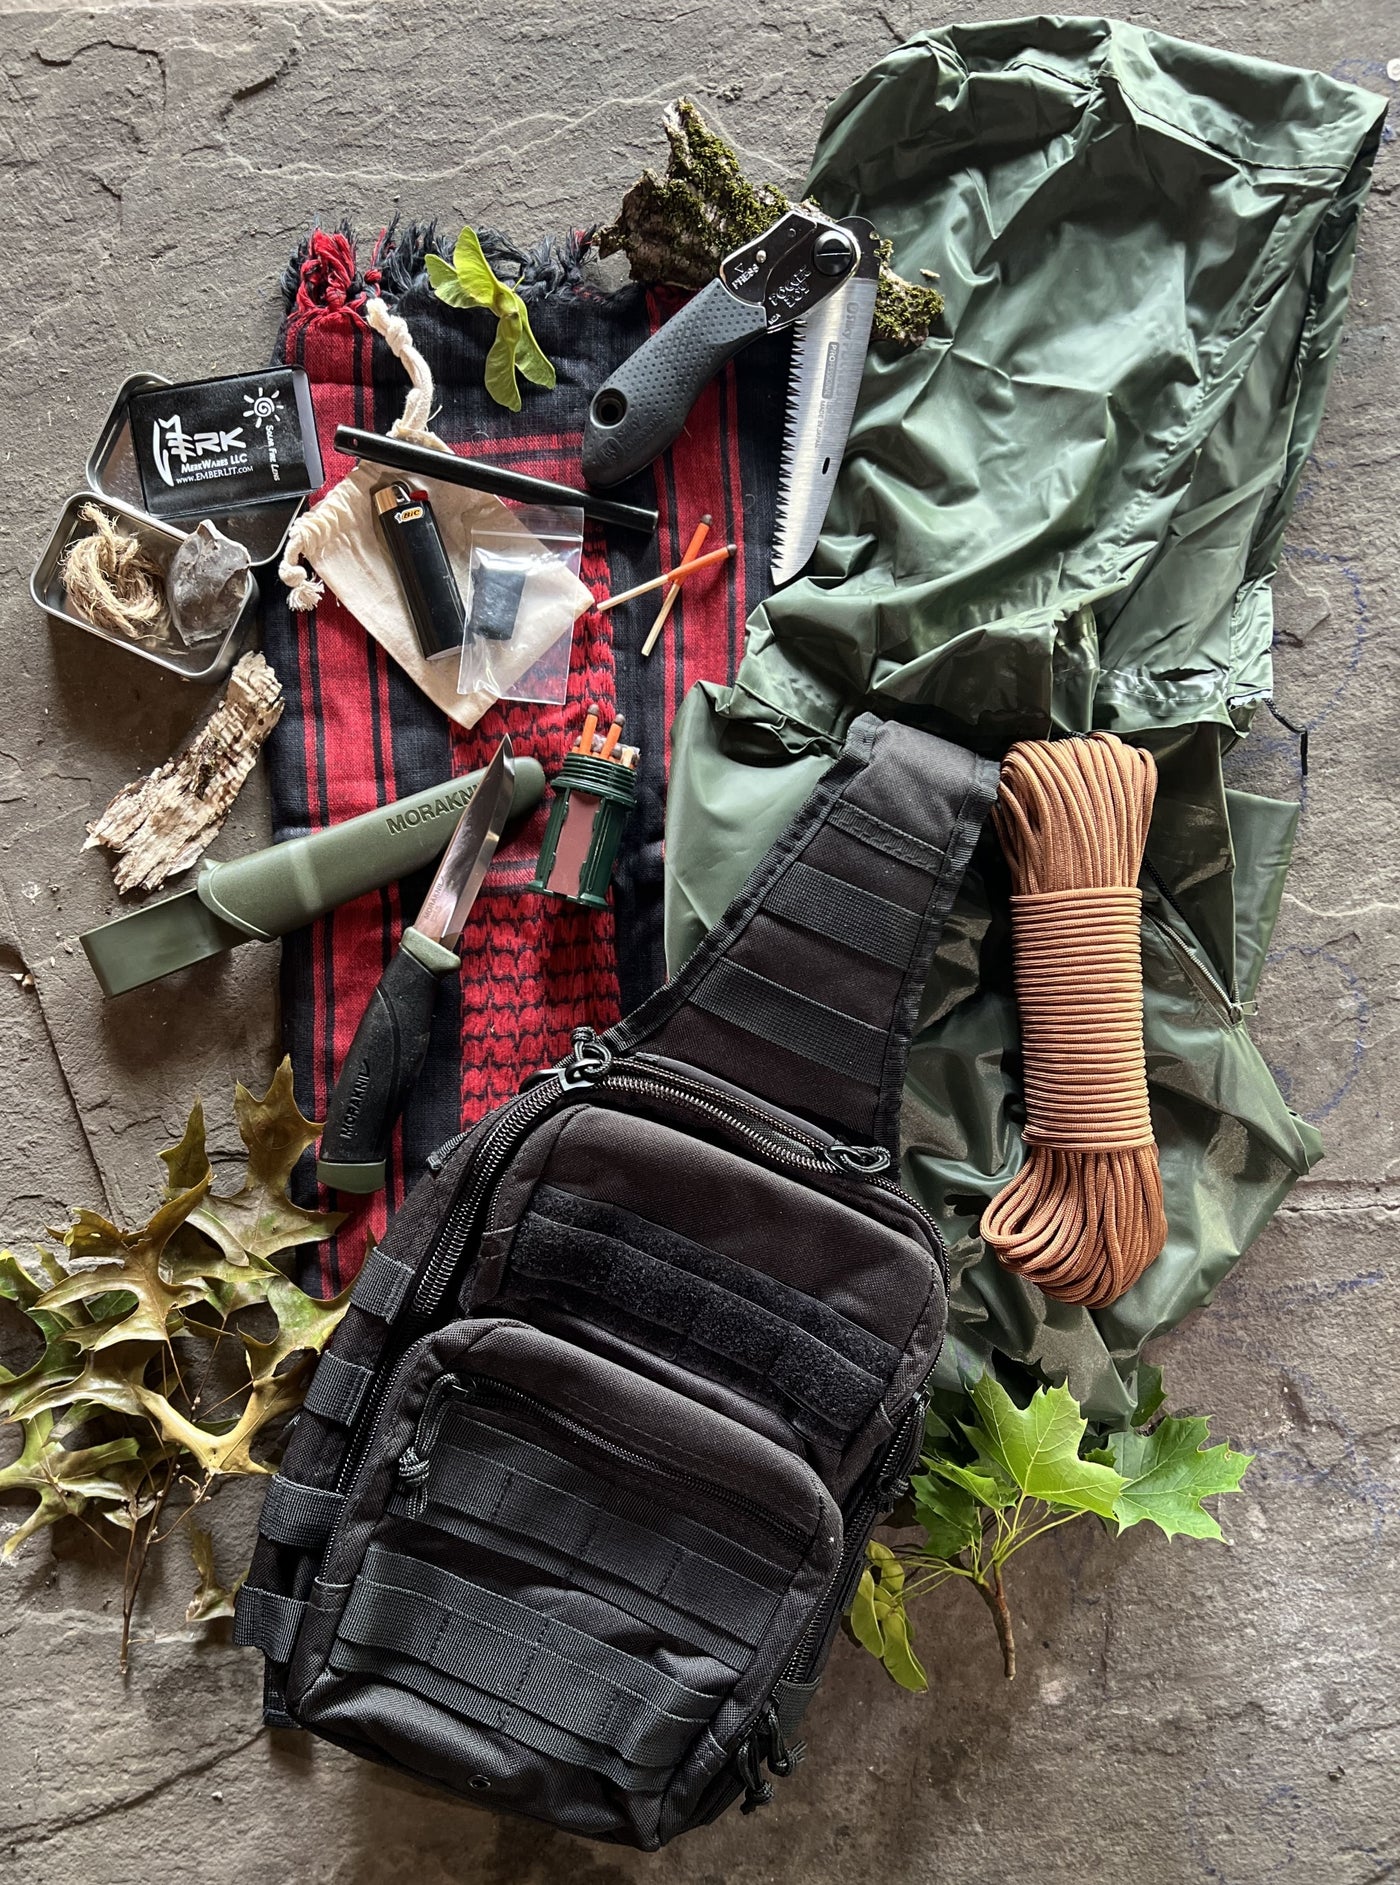 Premade Student Kits  Wildcard Wilderness Survival Kit – Survival Gear BSO